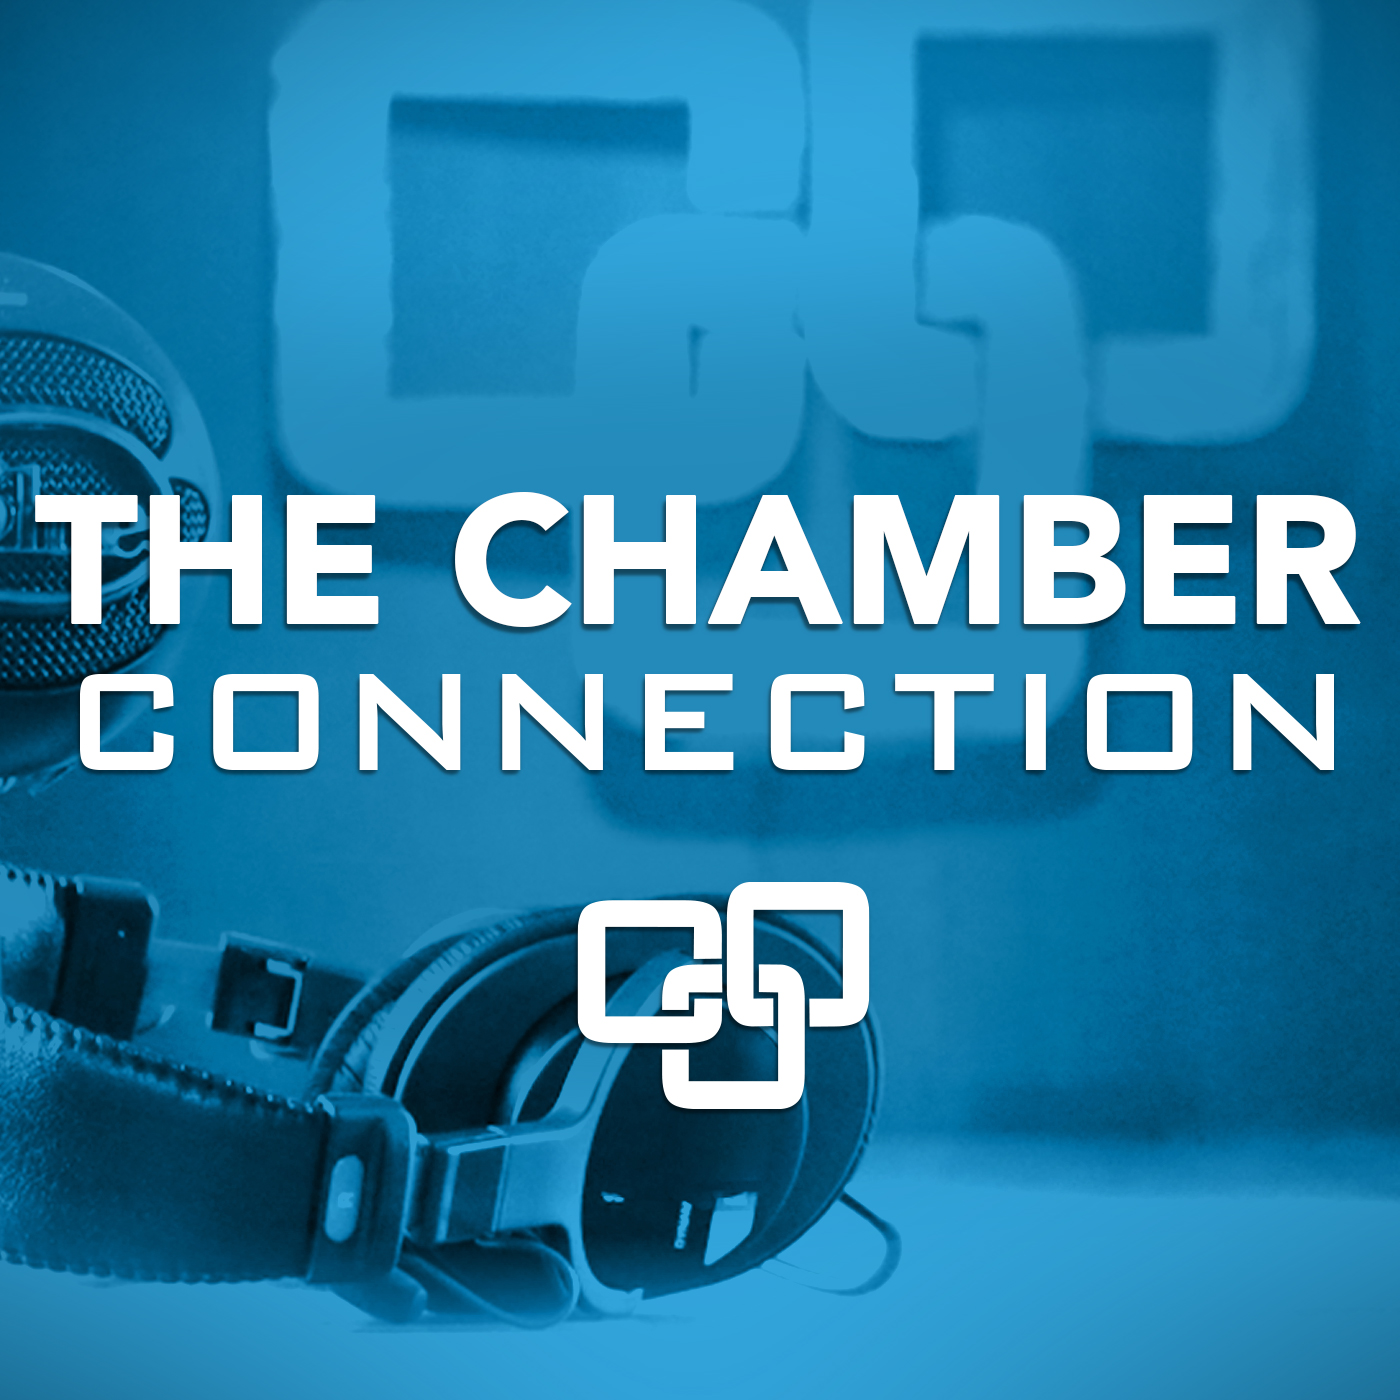 The Chamber Connection hosted by Katie Mastel featuring Arlette Preston and Mandy George